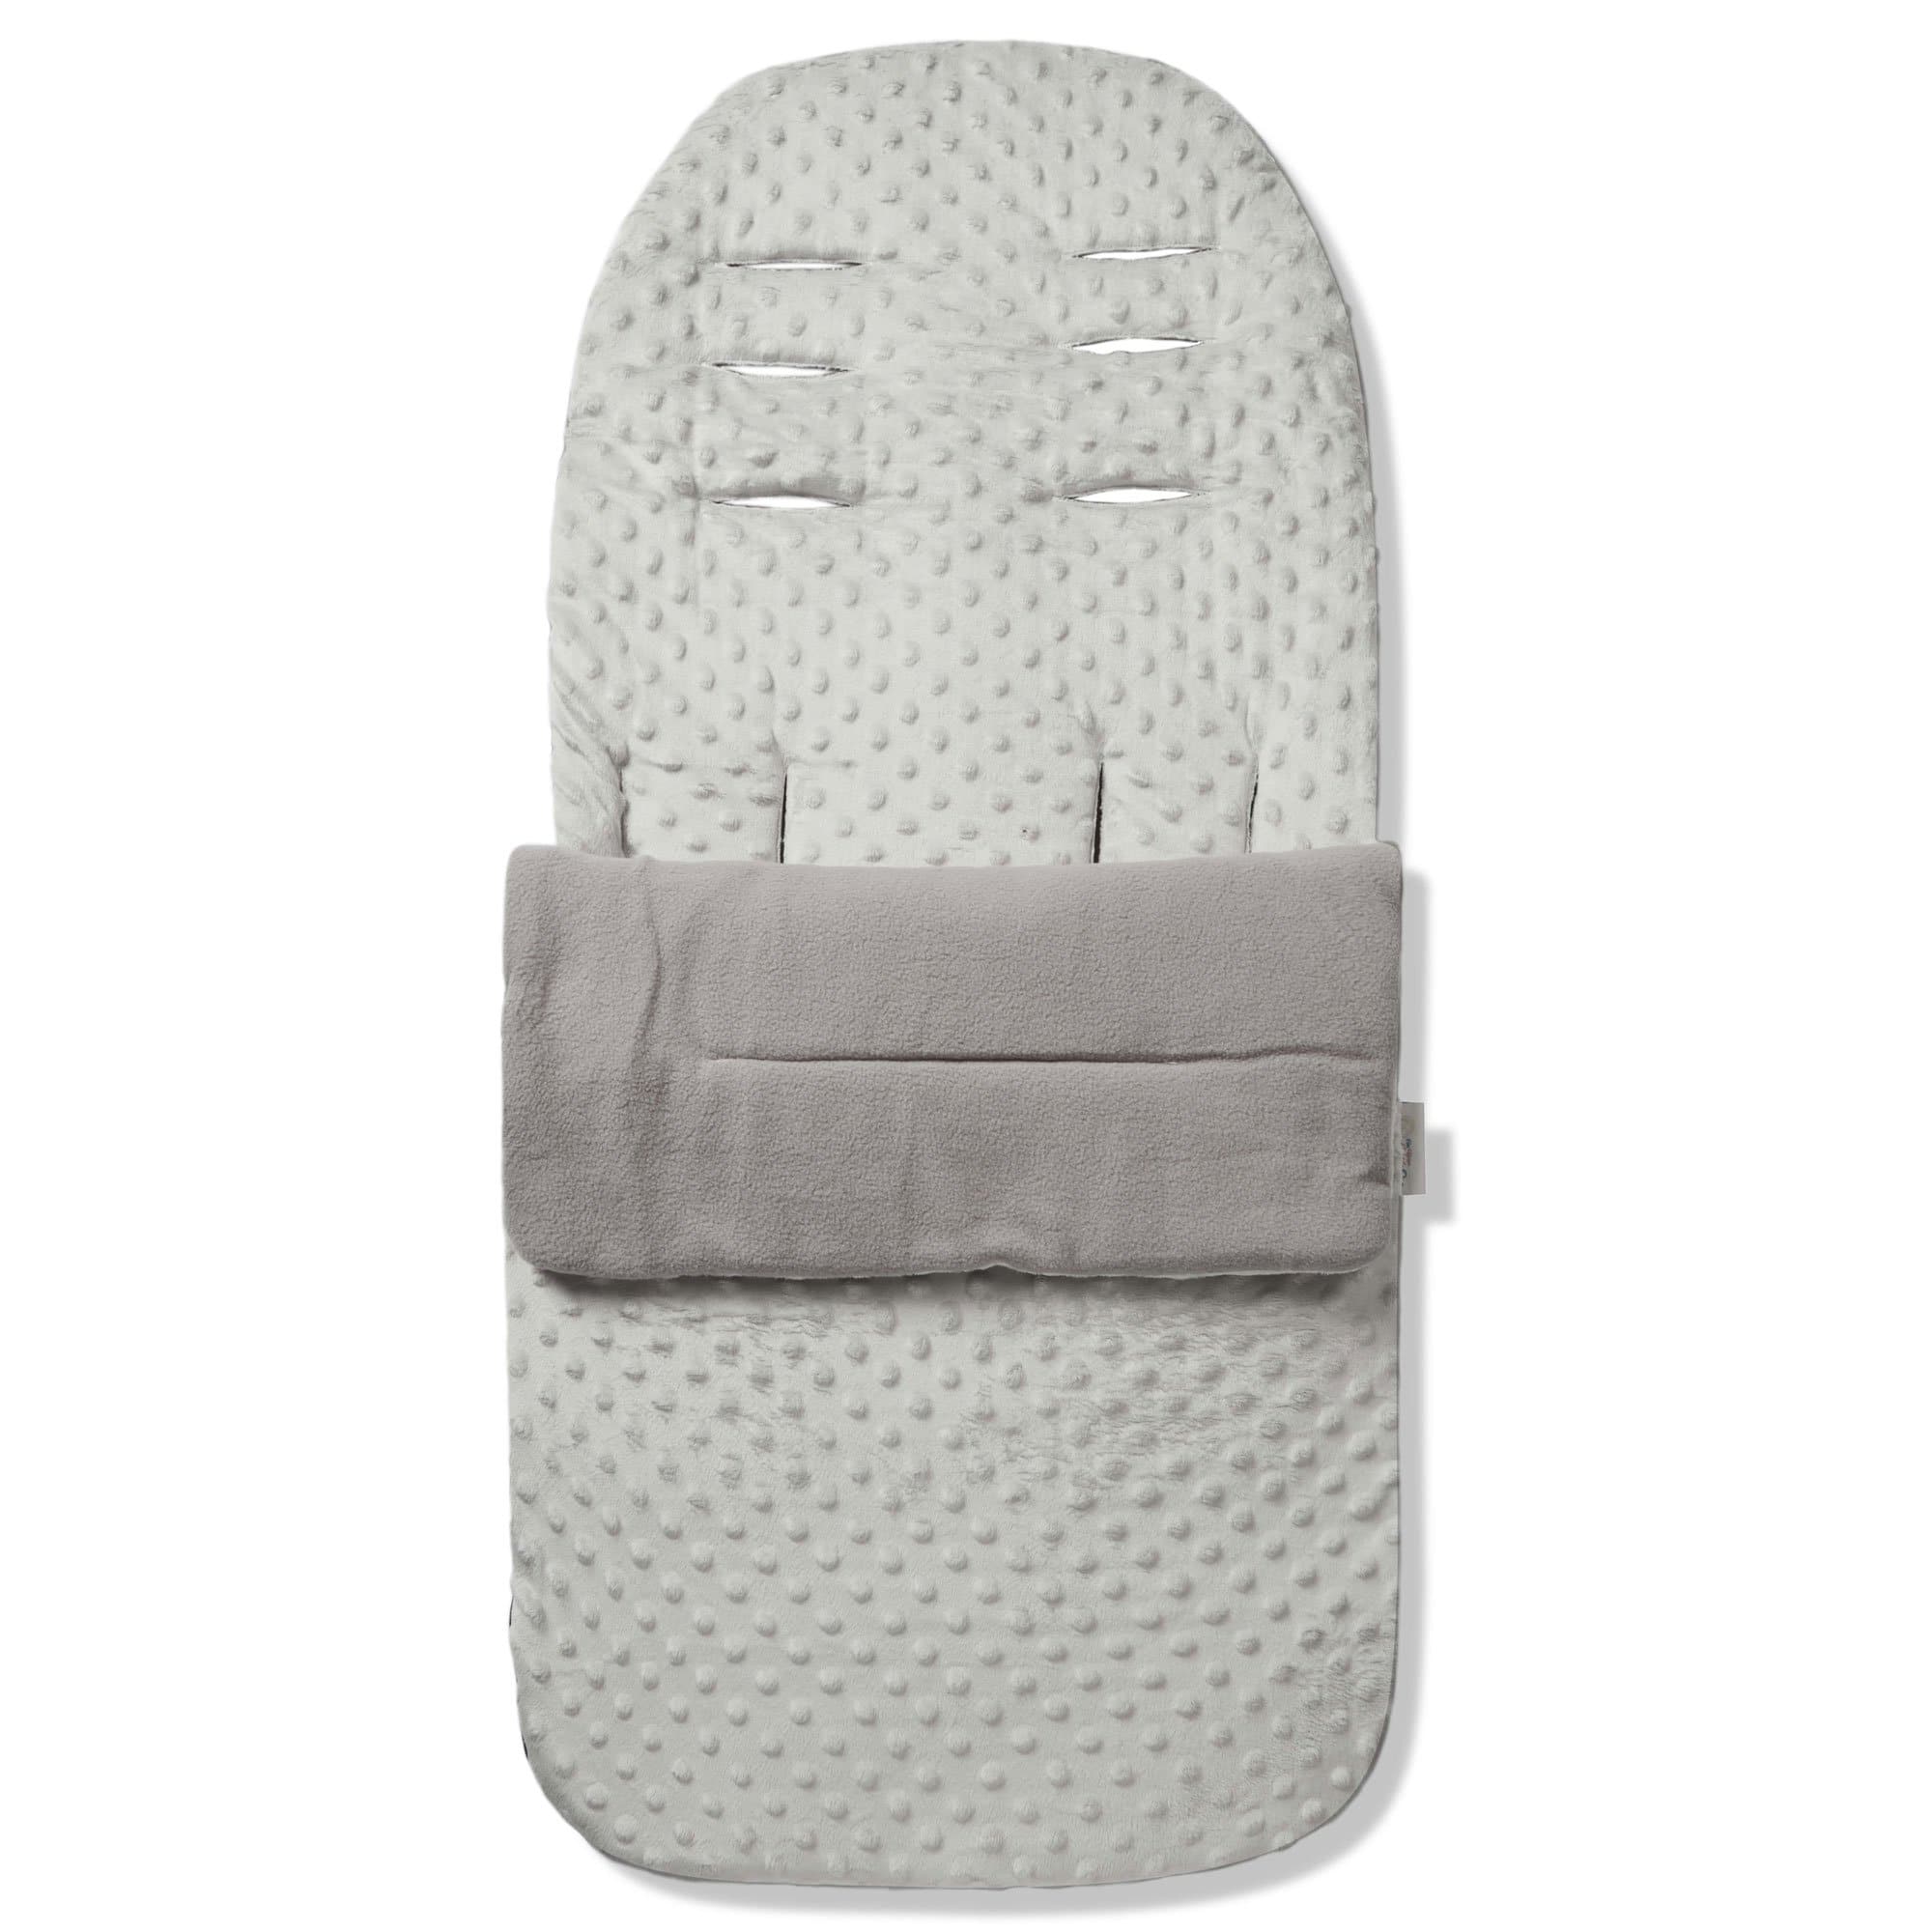 Dimple Footmuff / Cosy Toes Compatible with Excel - Grey / Fits All Models | For Your Little One